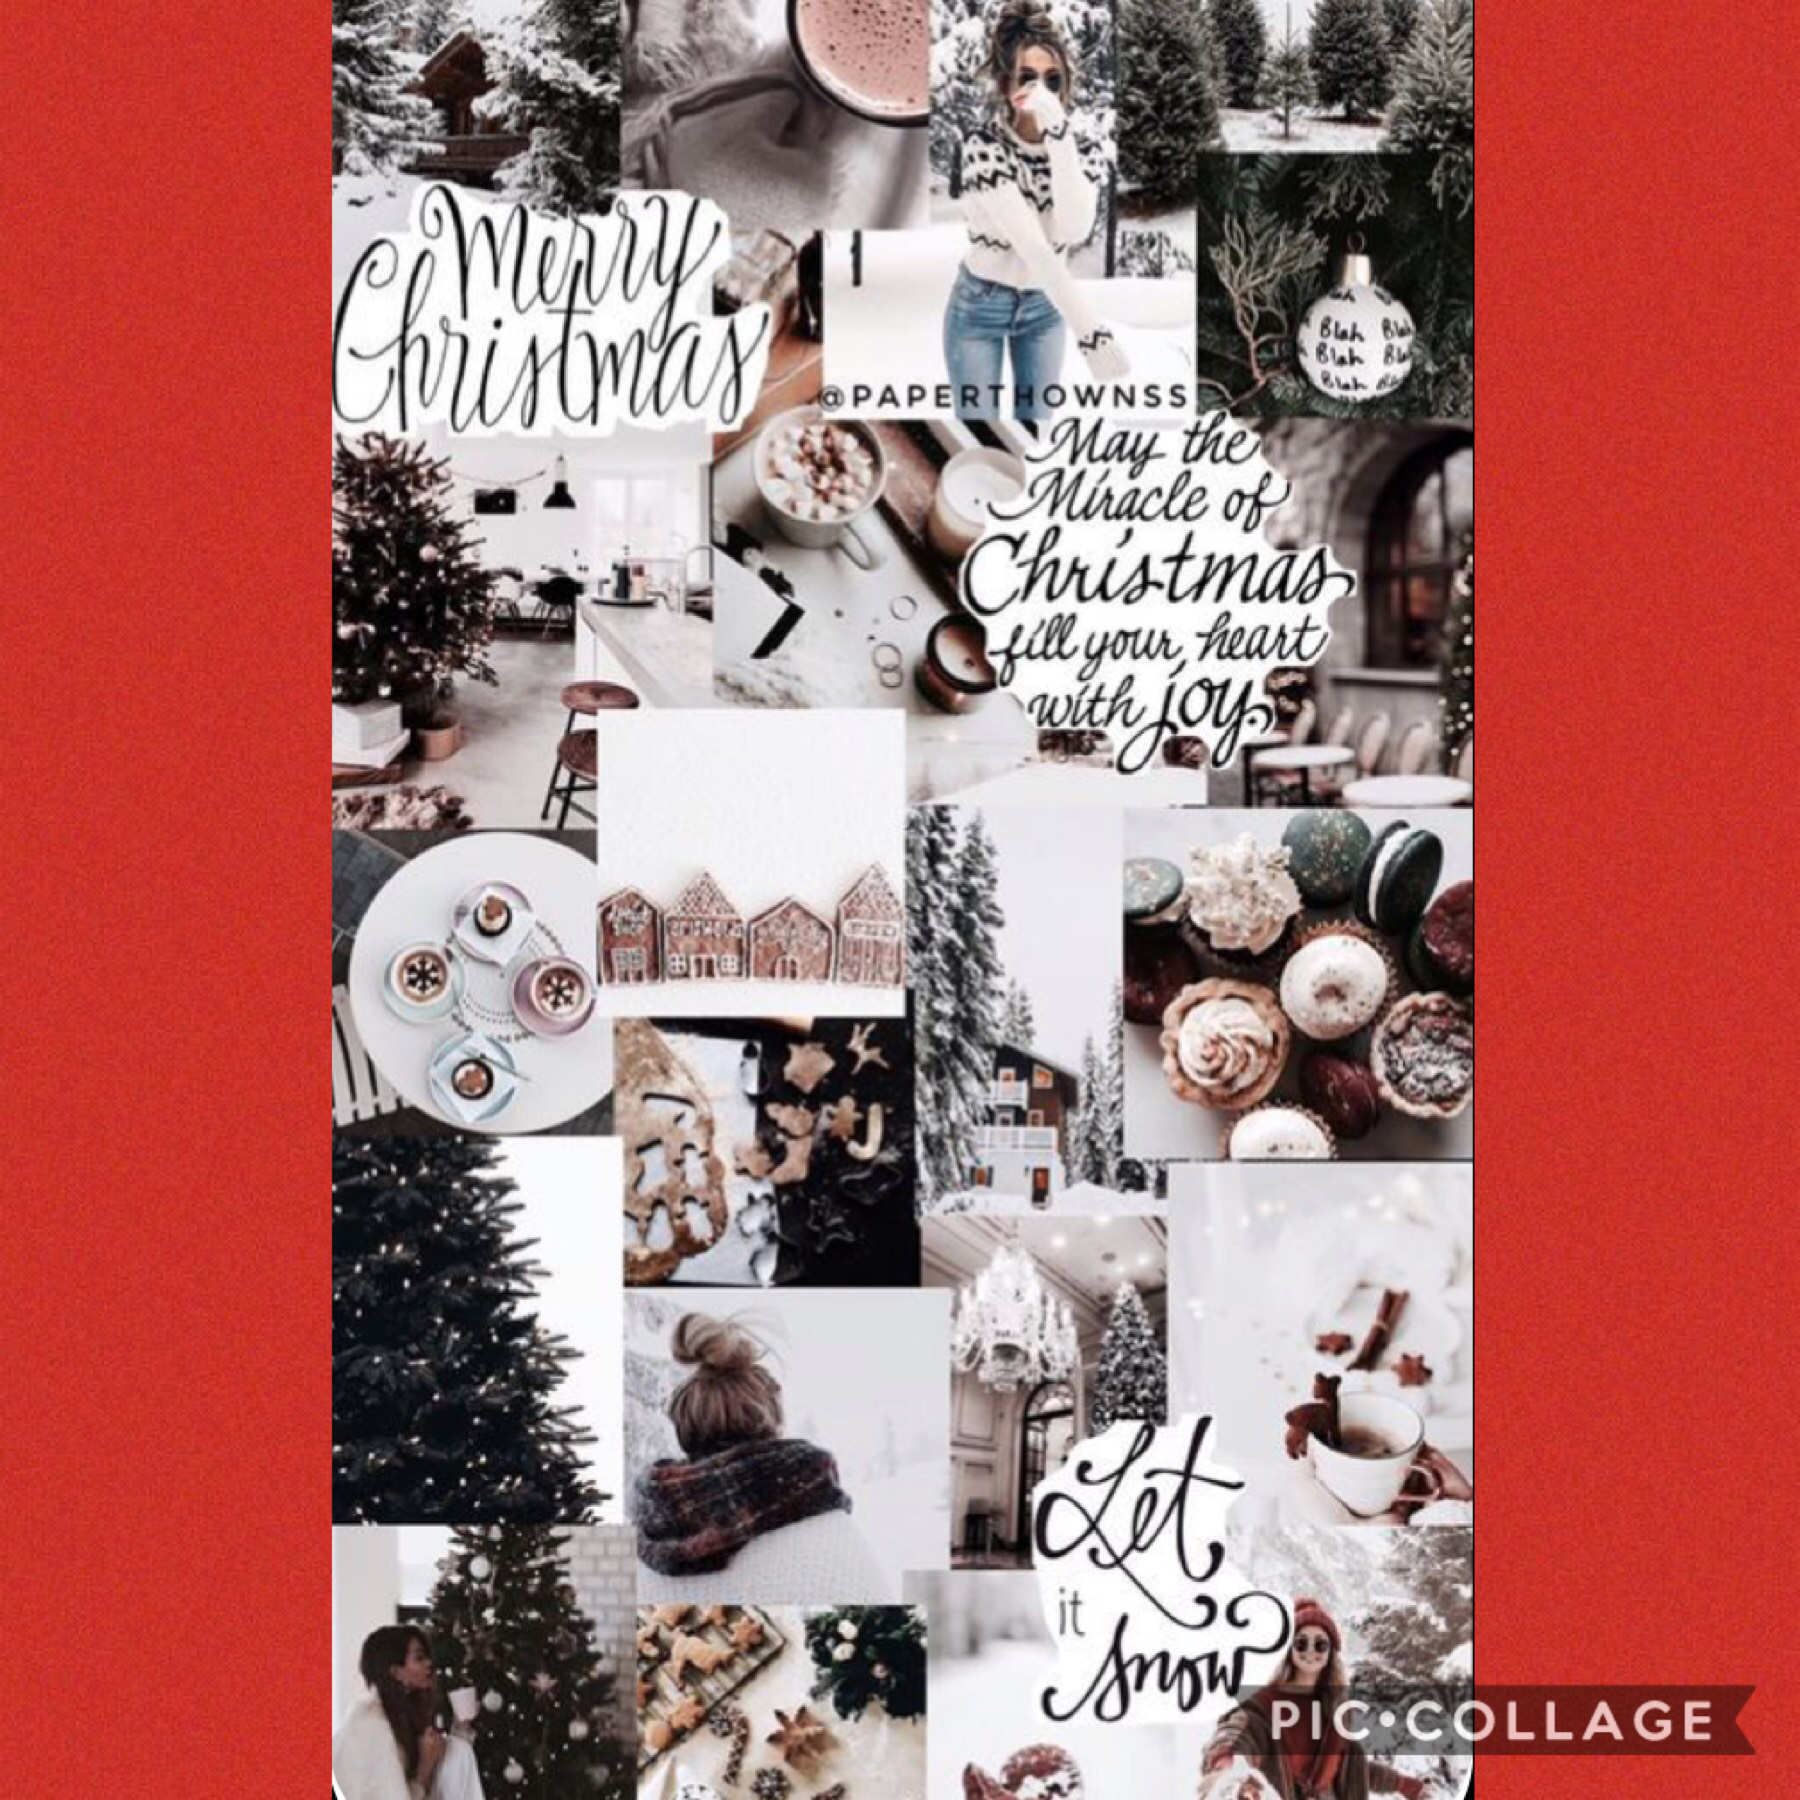 another christmas edit
💚❤️💚❤️💚❤️💚❤️💚